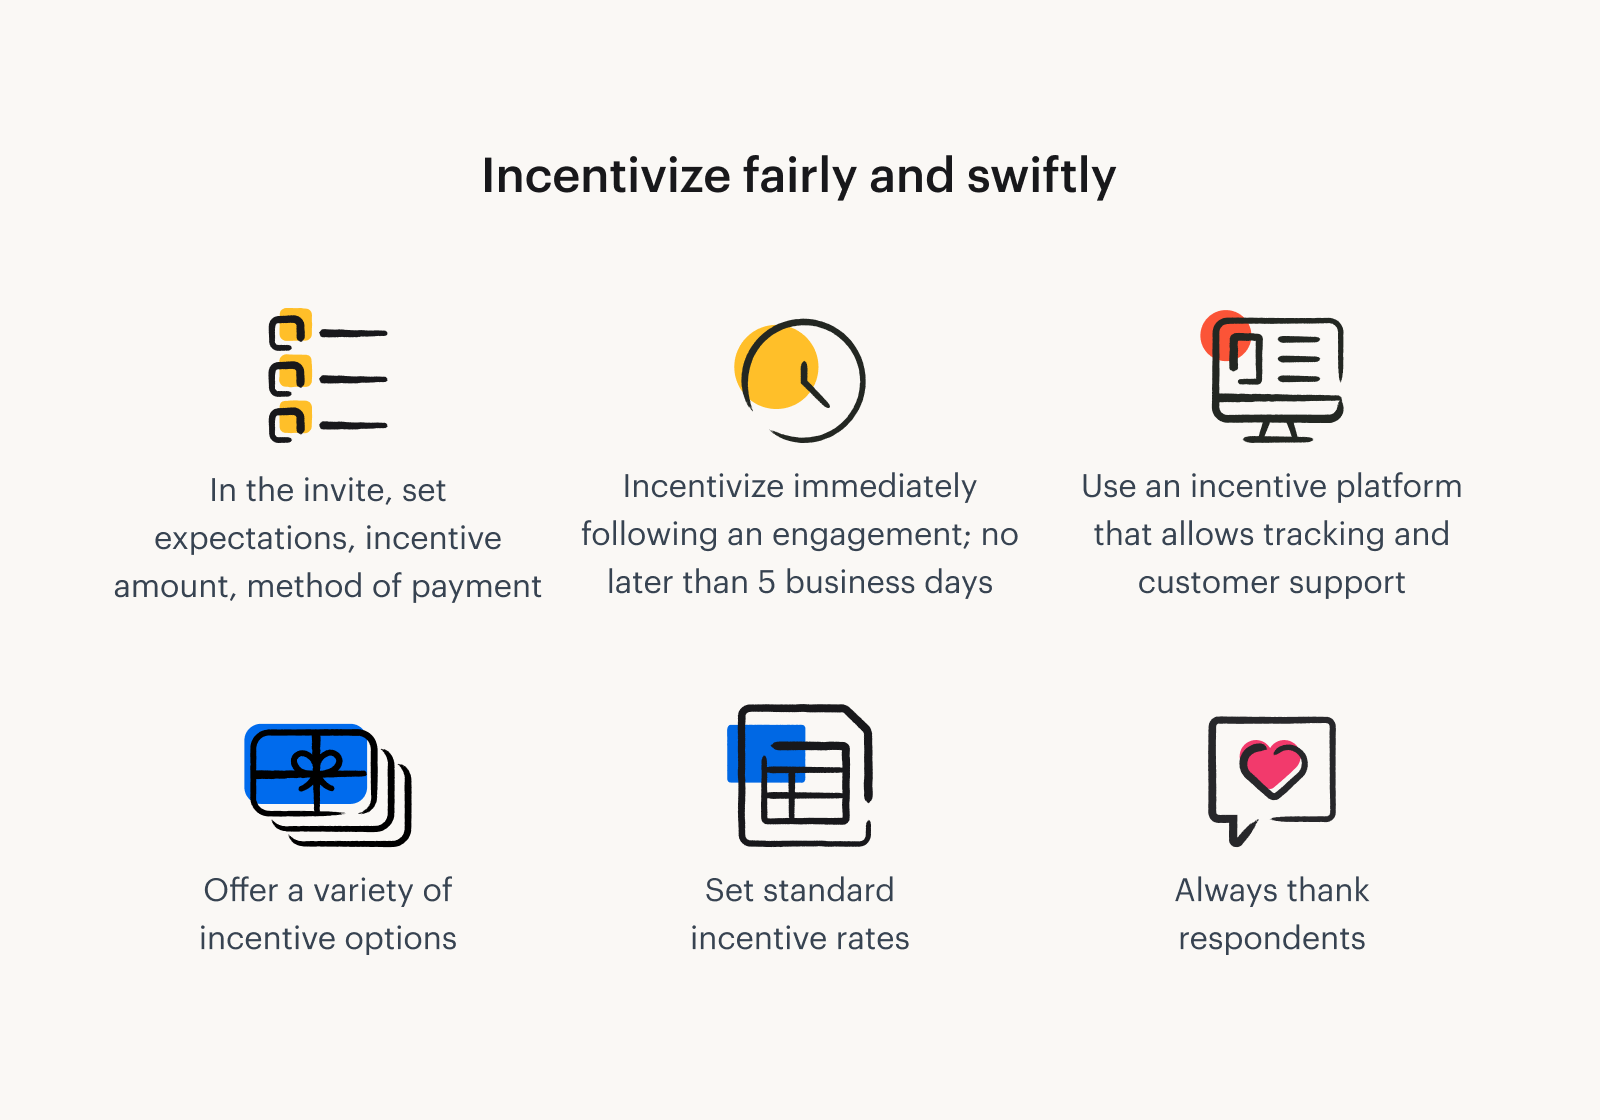 A graphic explaining the importance of incentivizing fairly and swiftly.